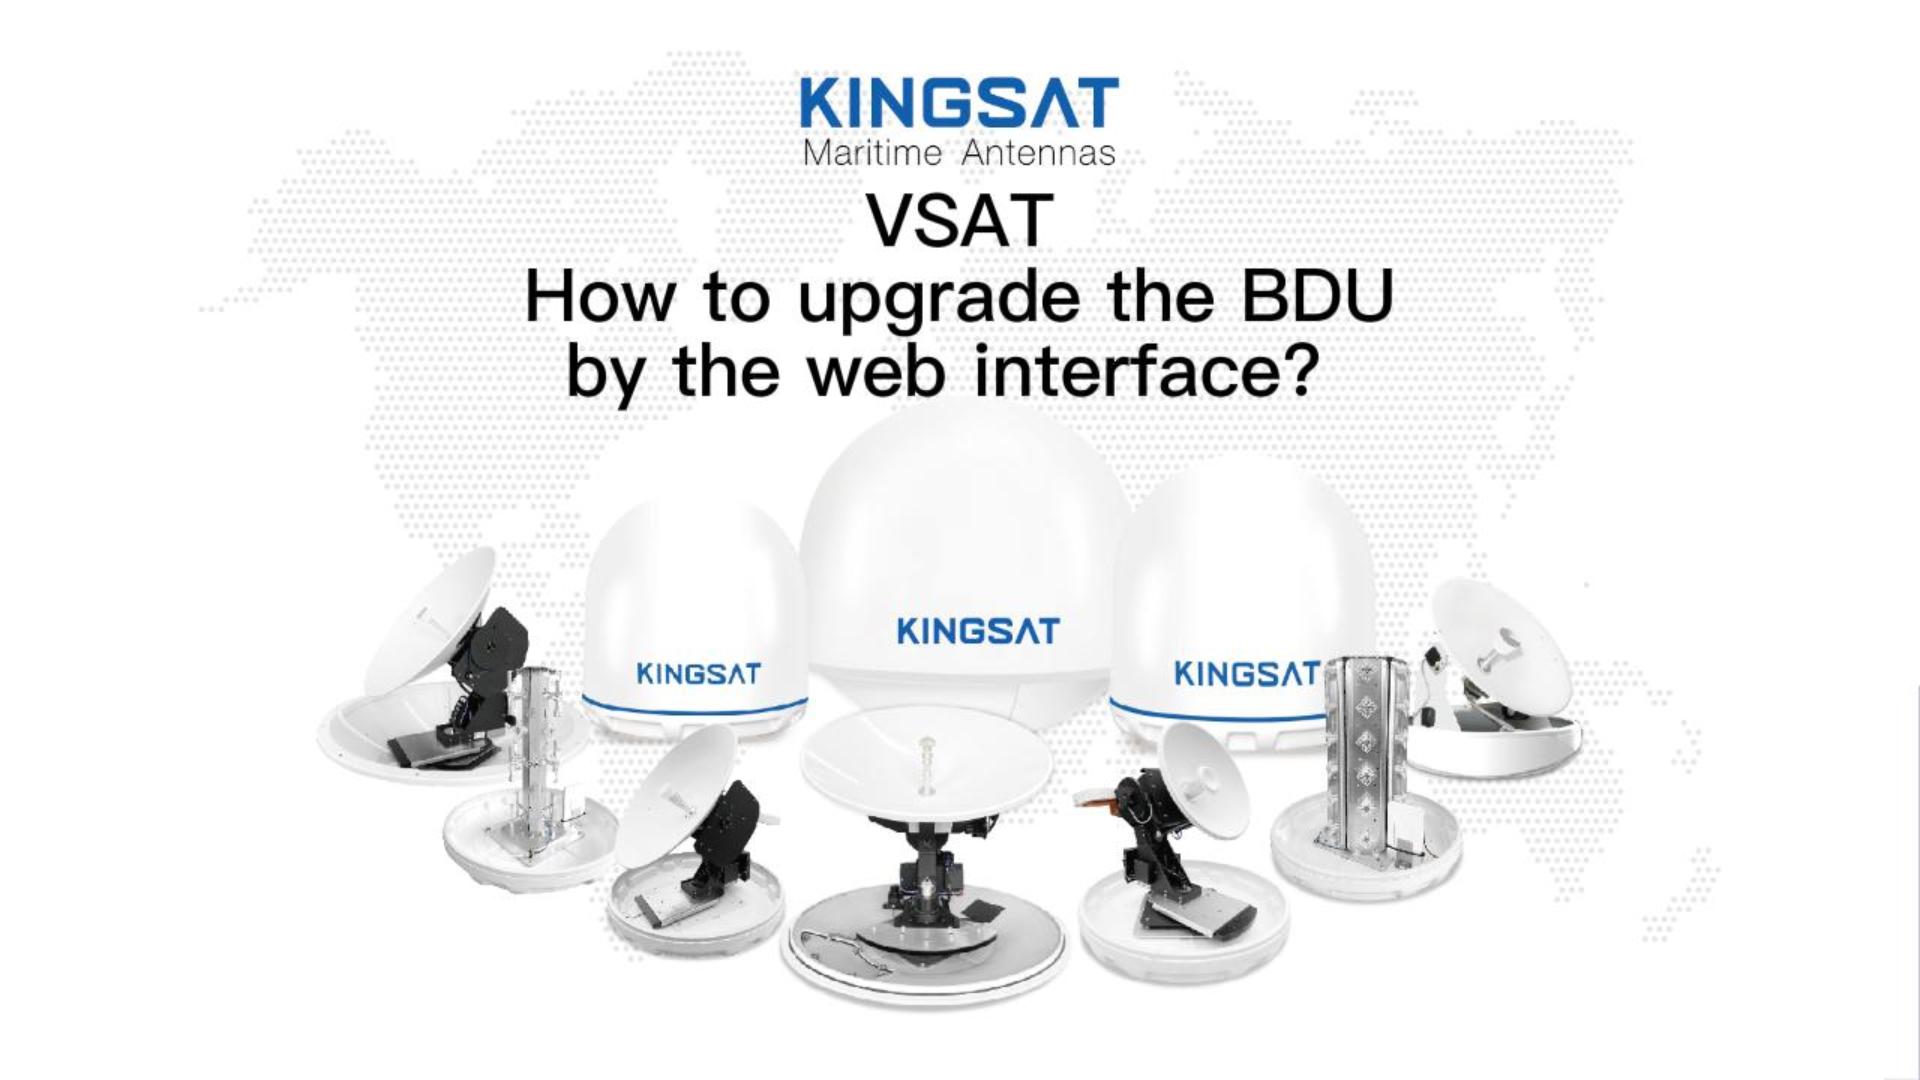 How to upgrade the BDU by the web interface?